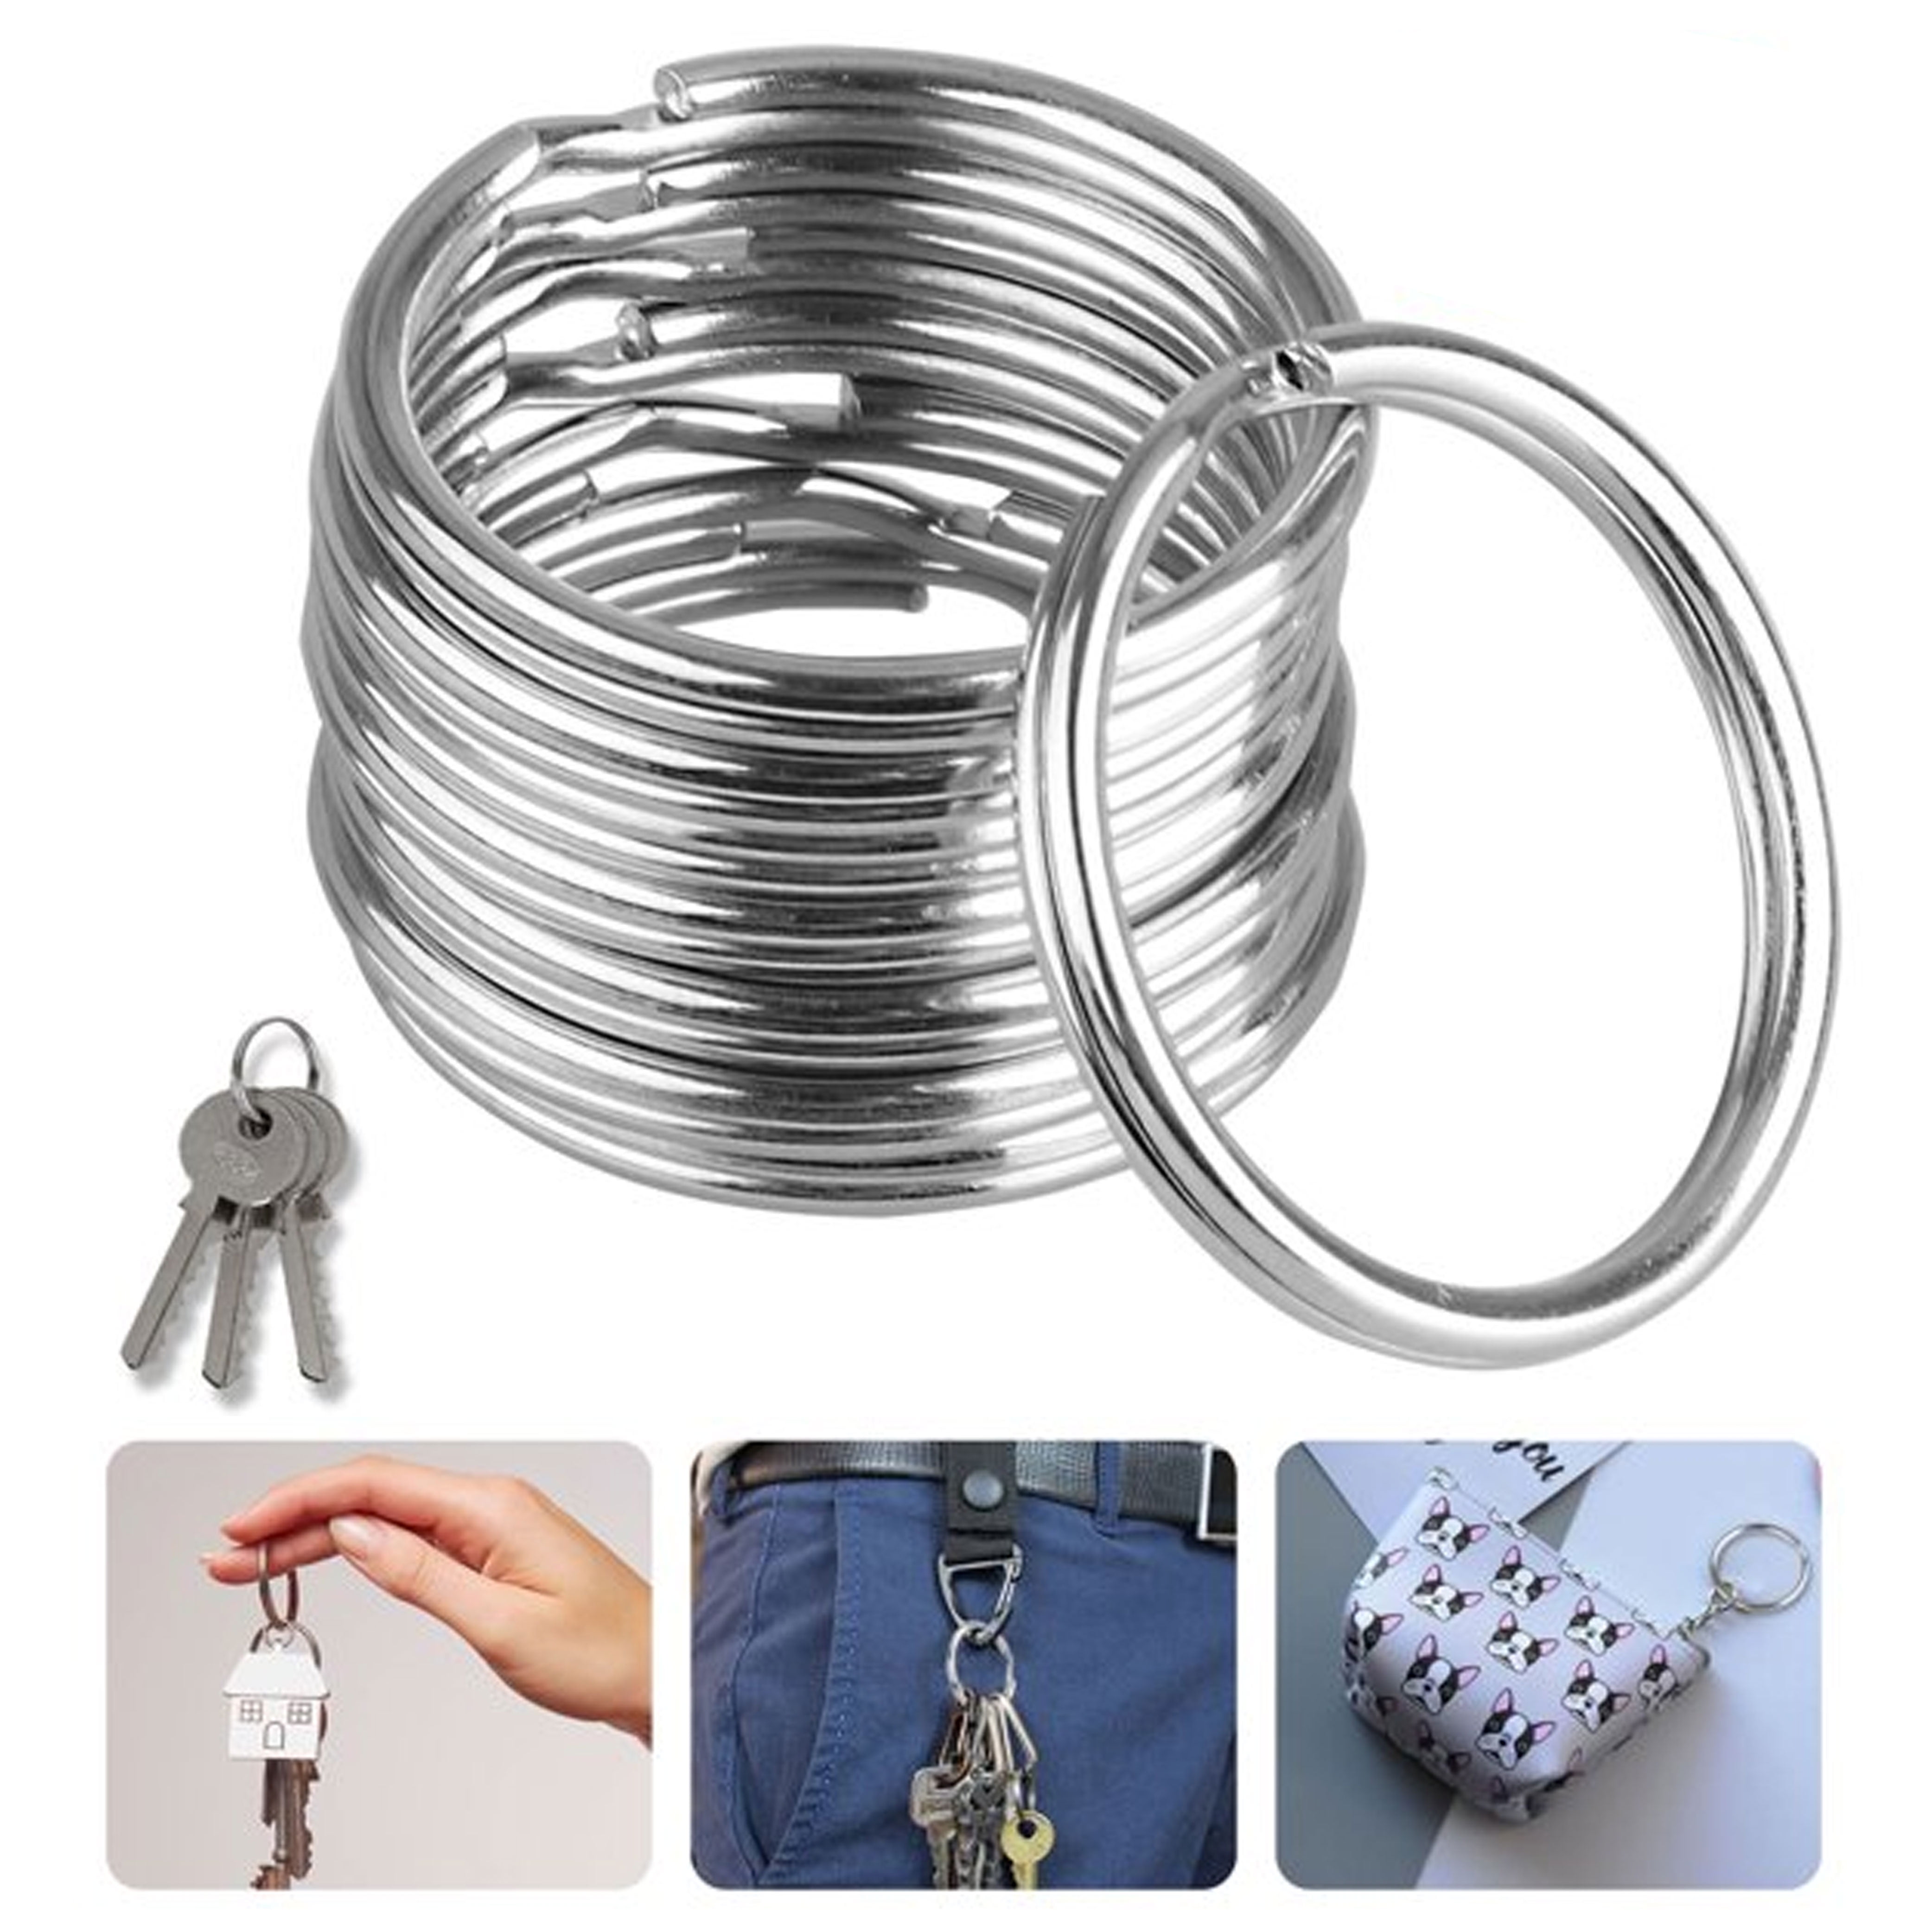 Bulk Metal Split Bangle Keychain Set For DIY Art And Crafts Ideal For Home,  Car Keys, And Flat Key Rings From Lbdwatches, $12.69